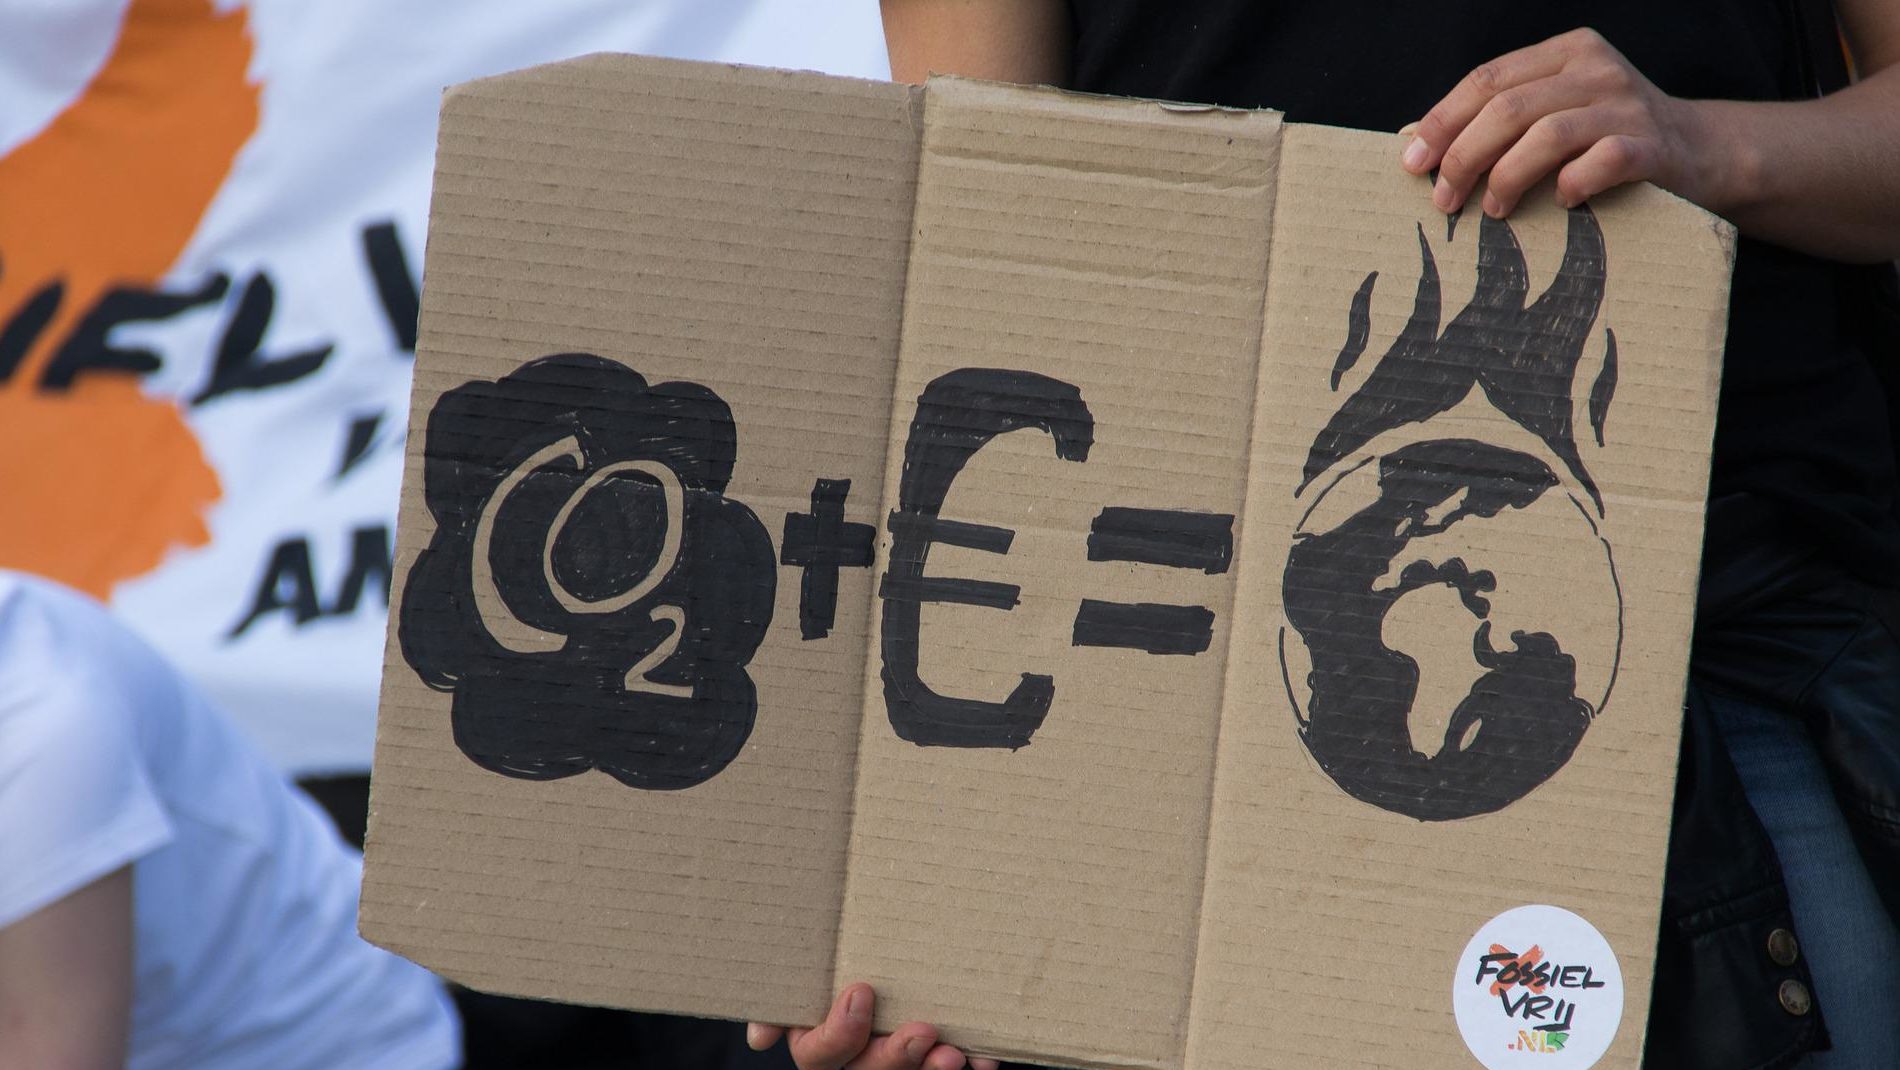 Climate change protester's placard